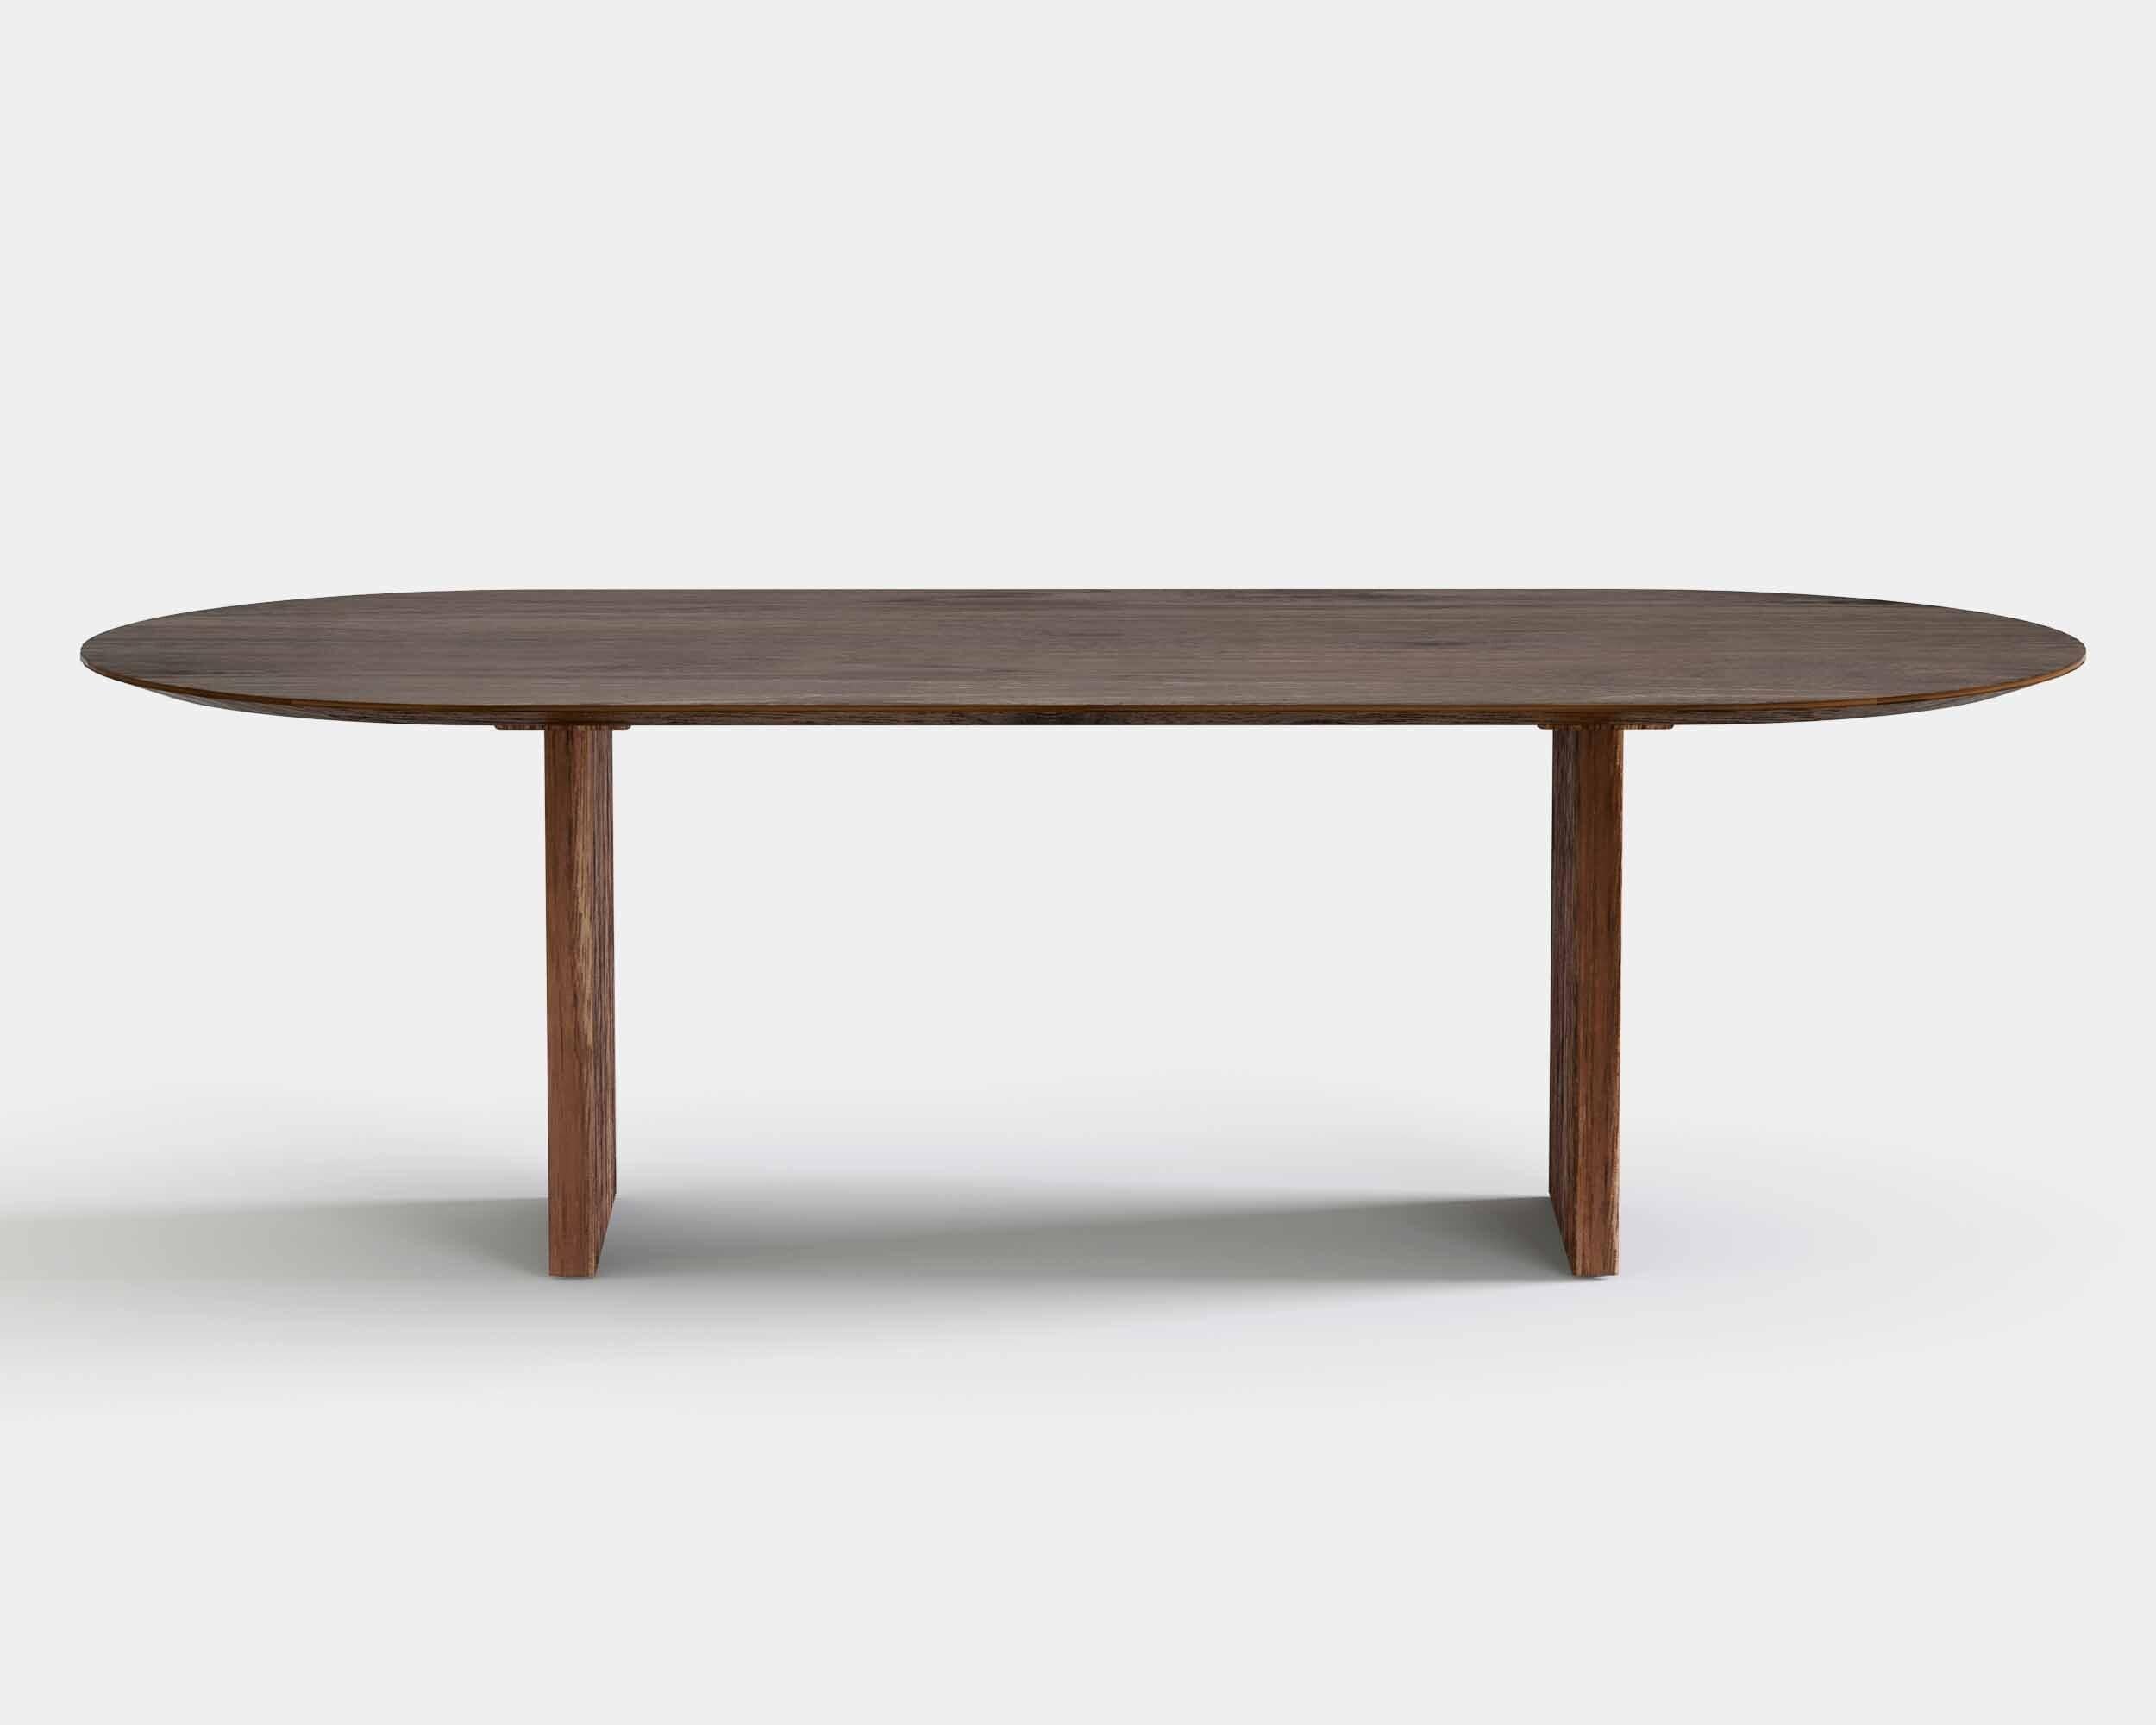 Ten dining table, oval, 200 cm.
Solid wood tabletop and legs. Handmade in Denmark.

Height: 72 or 74 cm

Tabletop dimensions:
– 200 x 95 cm
– 240 x 105 cm
– 270 x 105 cm
– 300 x 105 cm
– 340 x 105 cm
– 370 x 105 cm
– 400 x 105